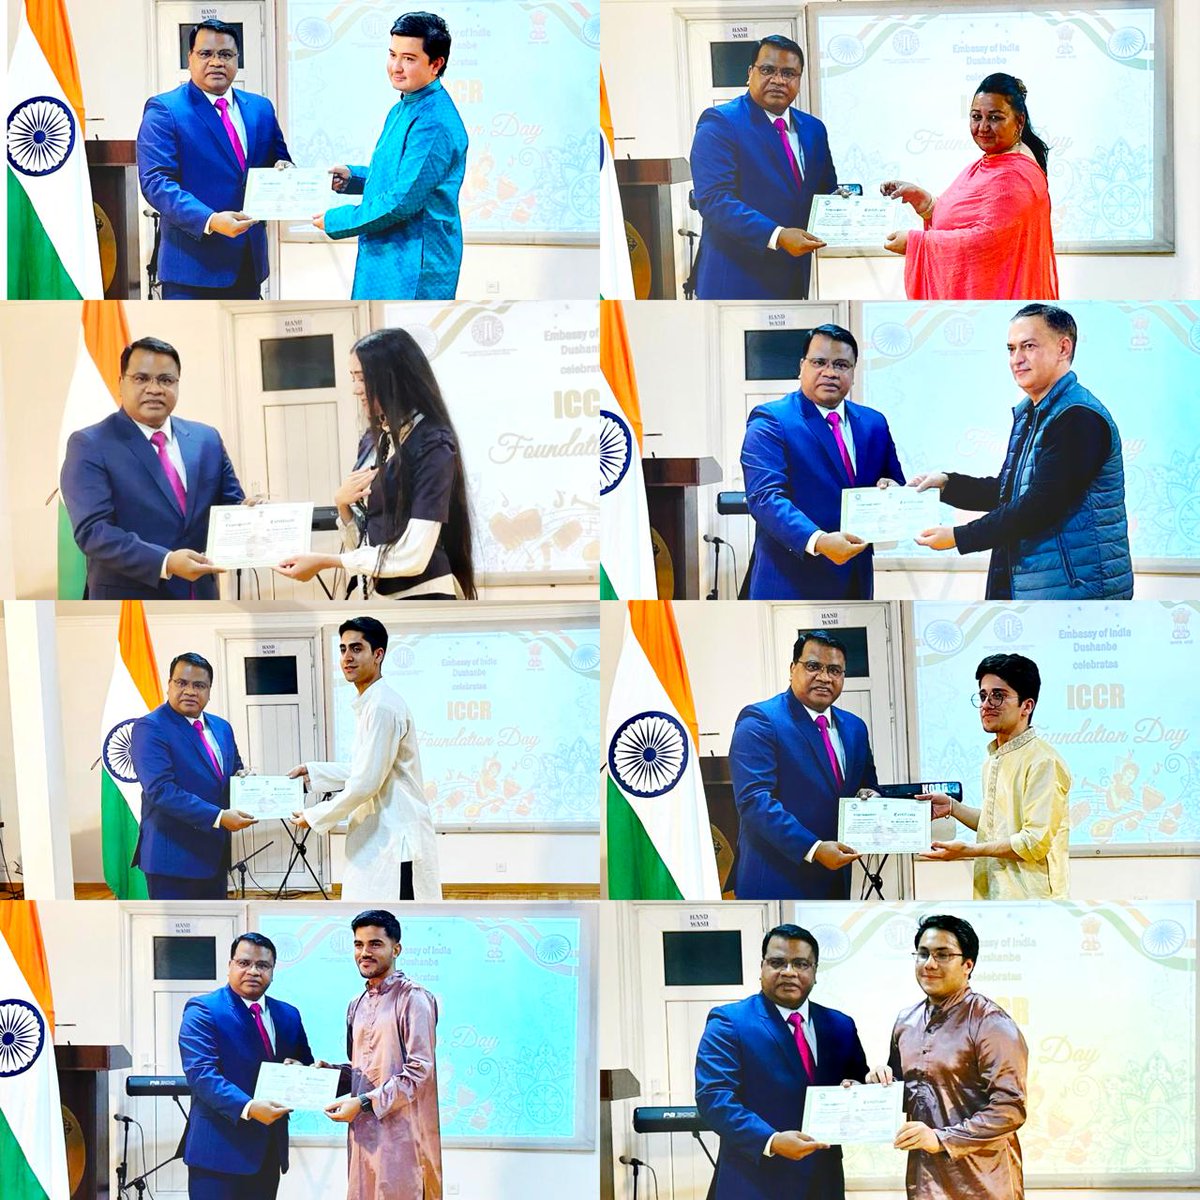 Students of SVCC, Dushanbe received certificates on successful completion of their percussion training class and presented cultural performance on the 75th ICCR Foundation Day. #ICCR #75years_of_ICCR #SVCC_Dushanbe #India #Tajikistan #EoI_Dushanbe #IndianDiplomacy